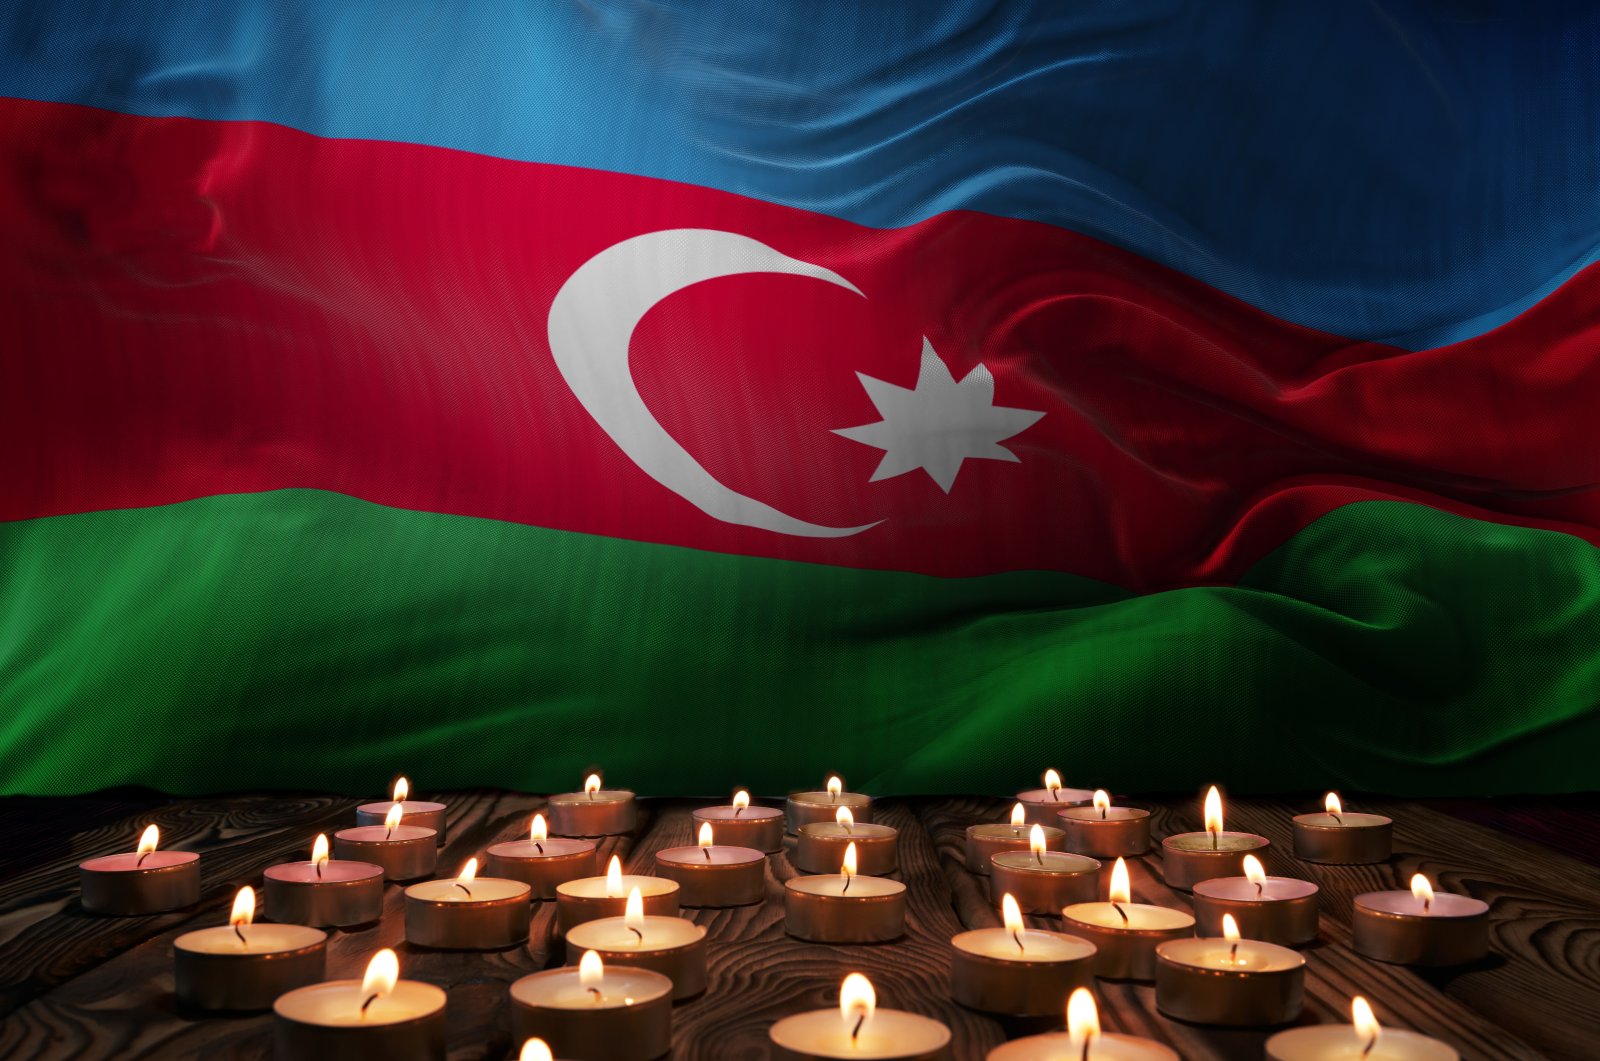 An illustration of mourning candles burning in front of the Azerbaijani national flag. (Photo by Shutterstock)